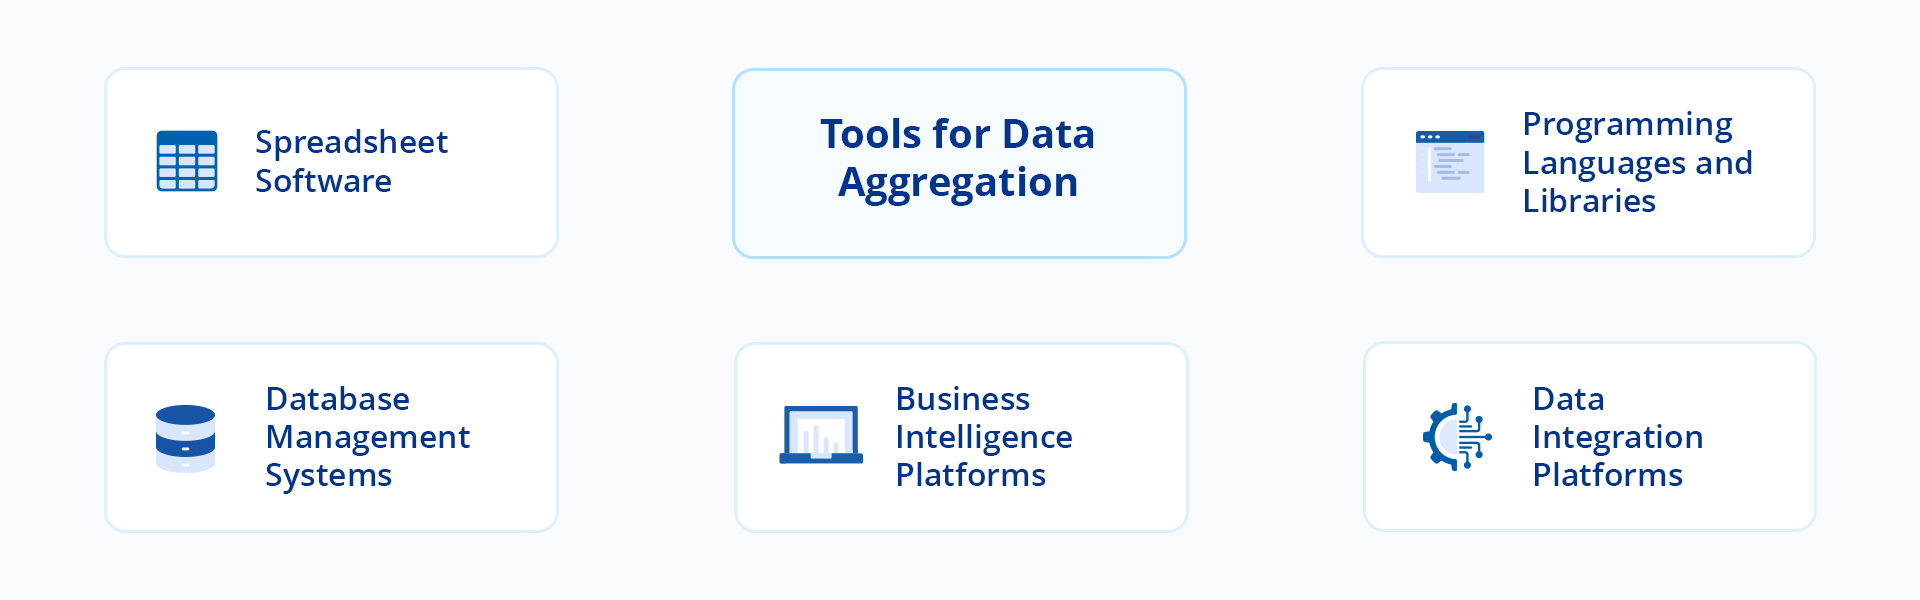 An image depicting the different tools used for data aggregation.